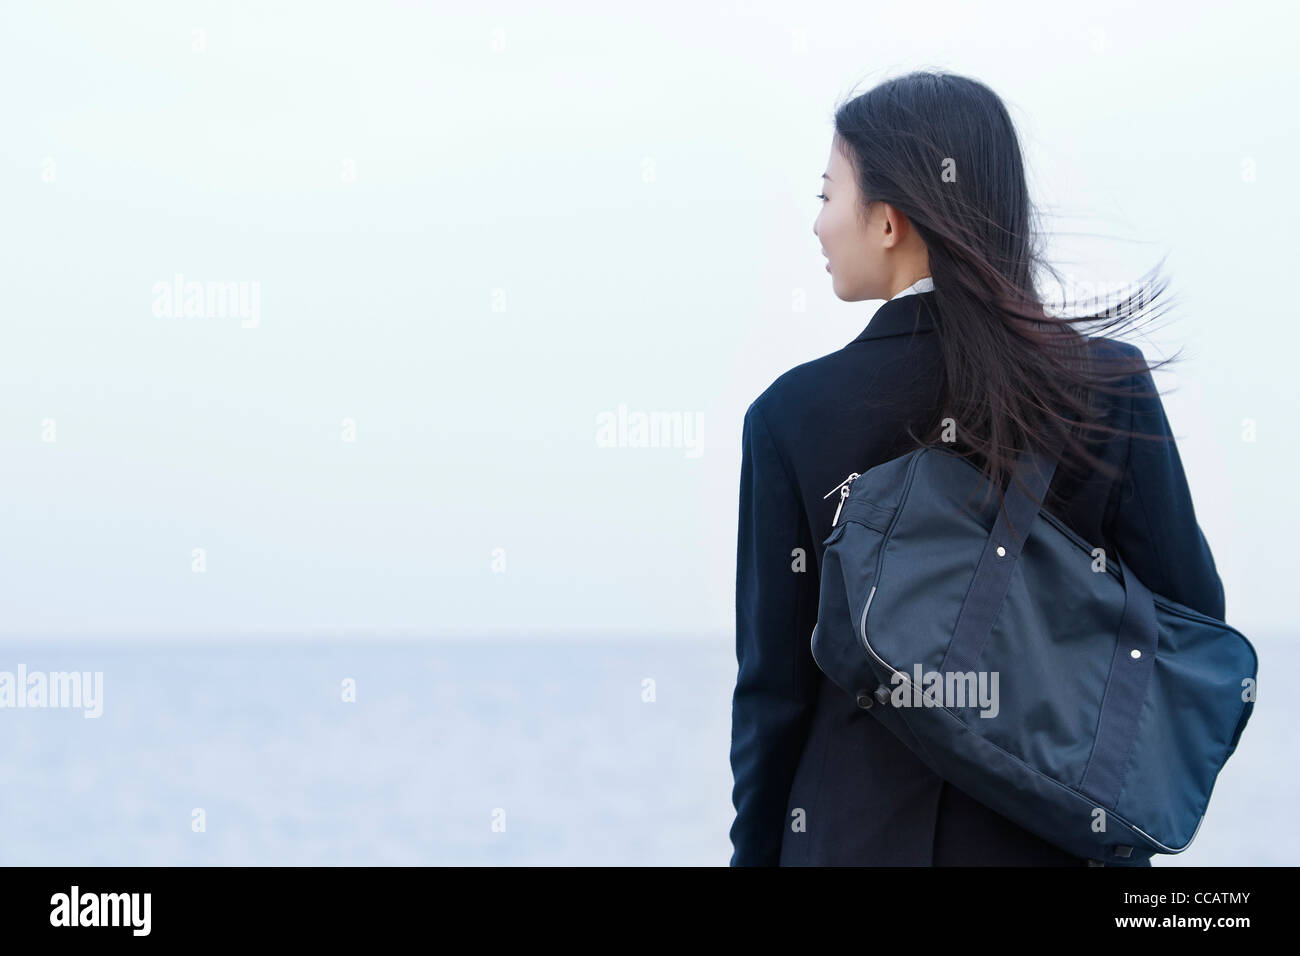 High school girl looking at the ocean Stock Photo